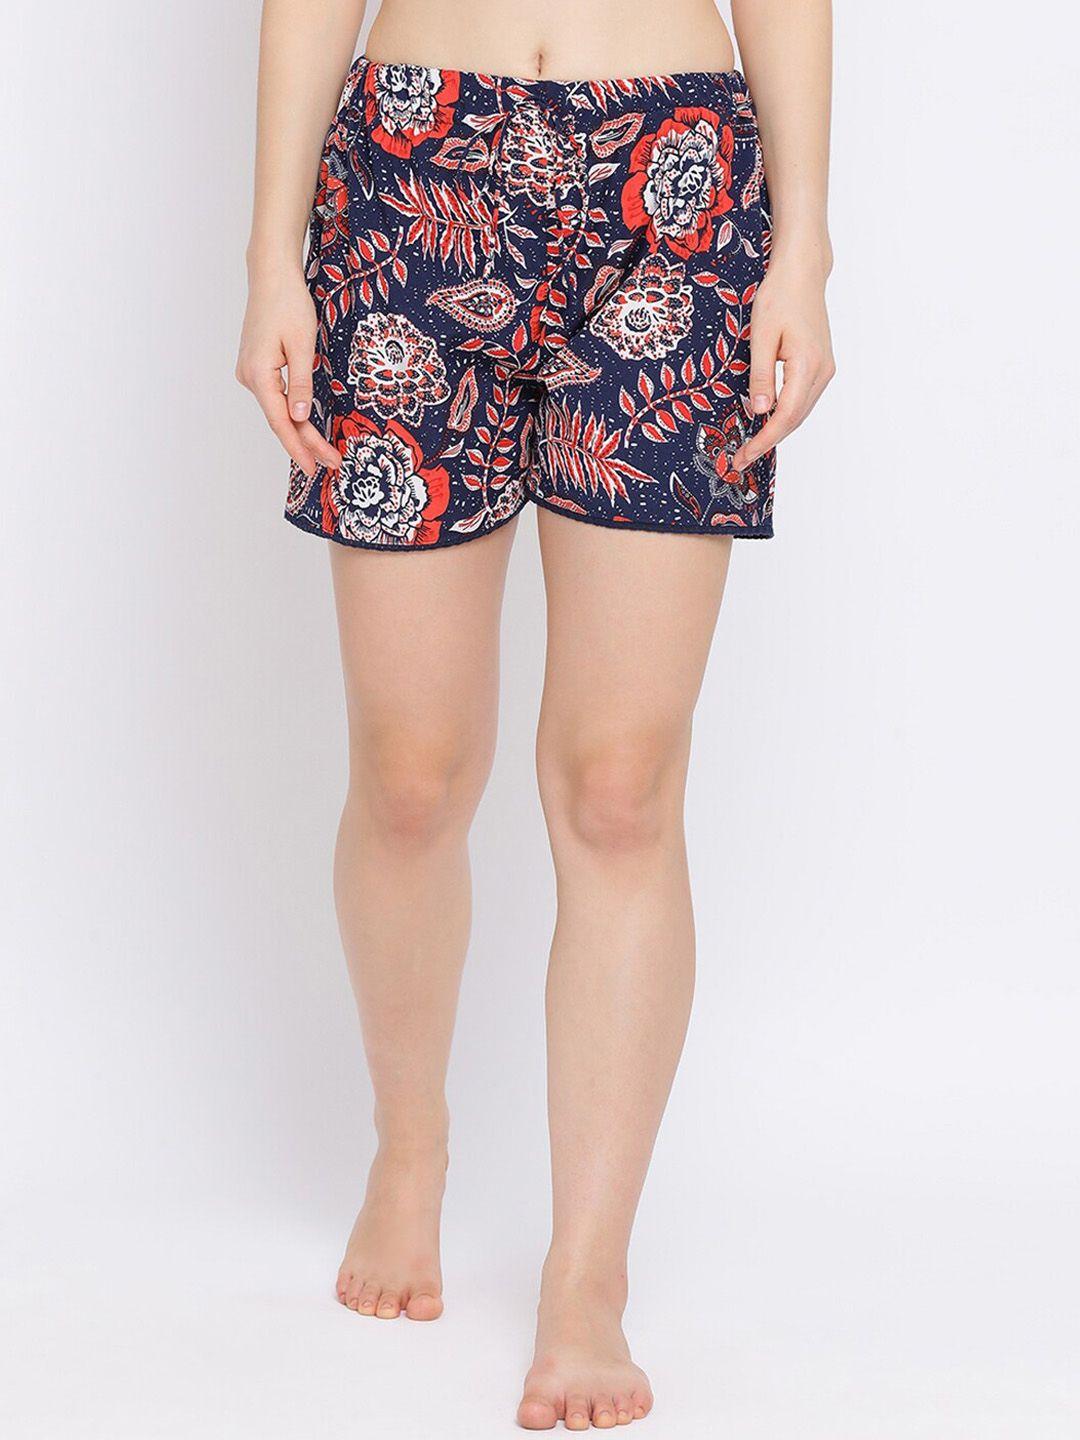 oxolloxo-women-multicolored-floral-print-lounge-shorts